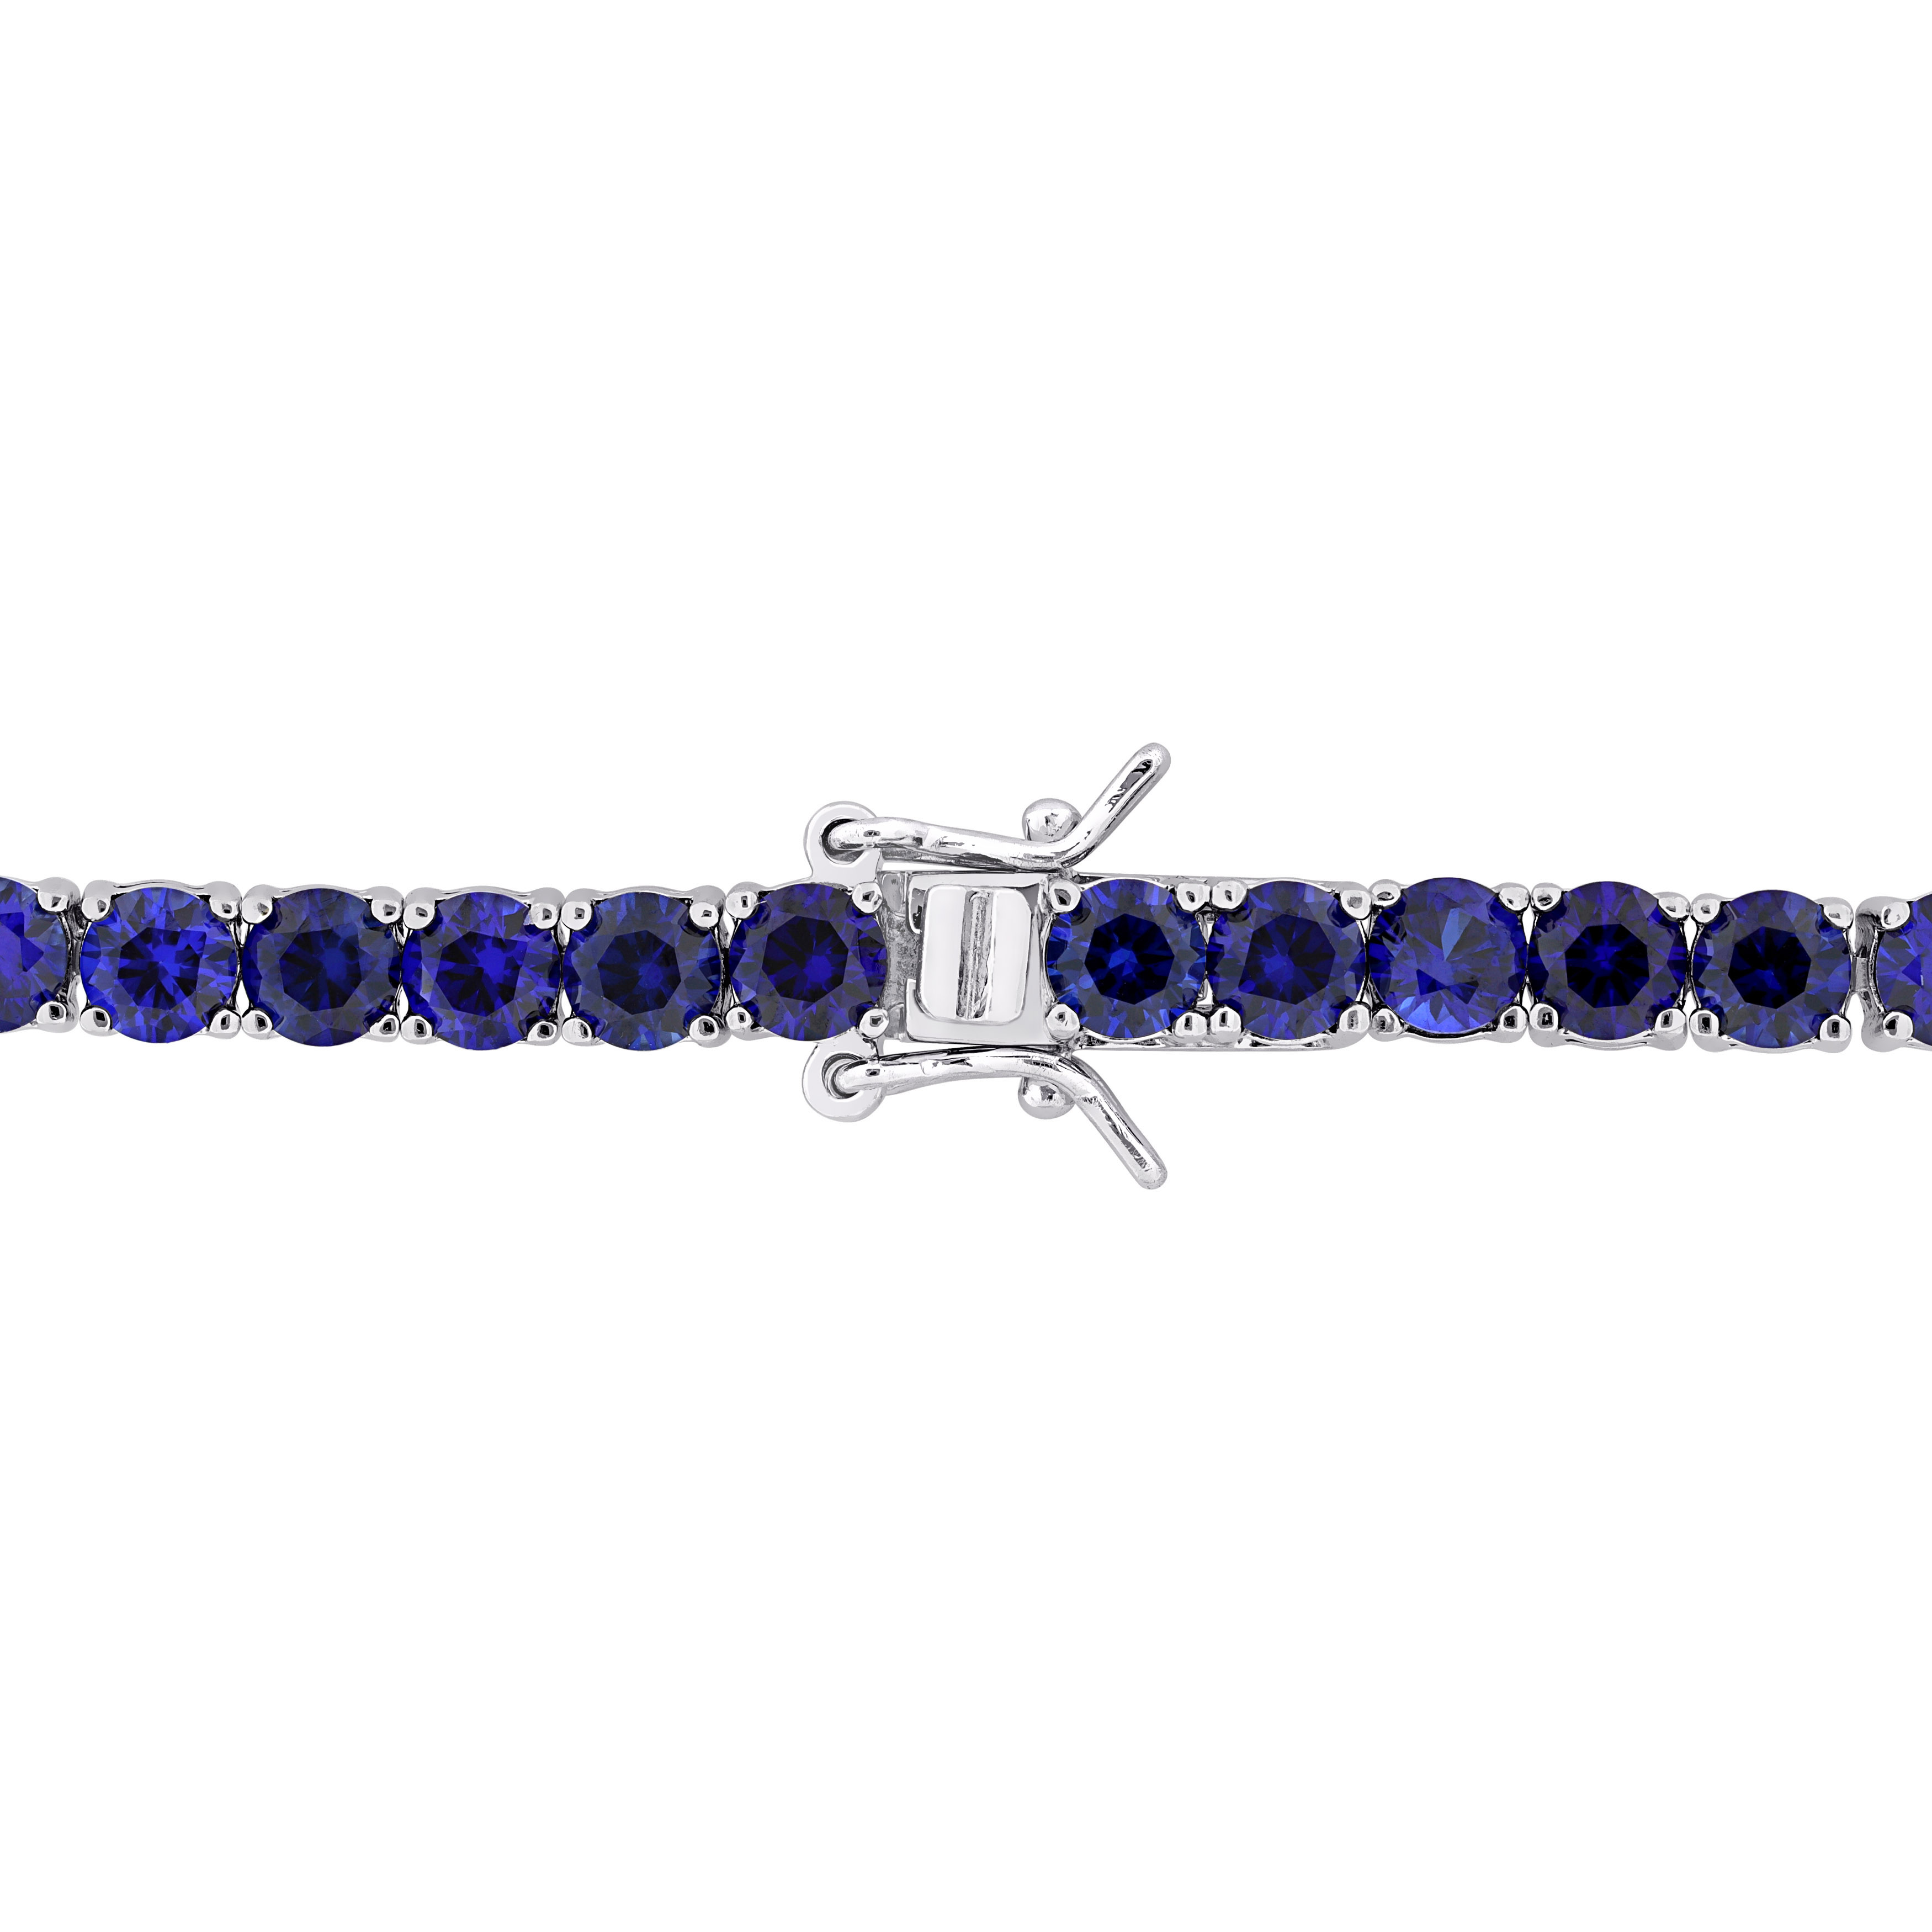 14 1/2 CT TGW Created Blue Sapphire Classic Tennis Bracelet in Sterling Silver - 7.25 in.